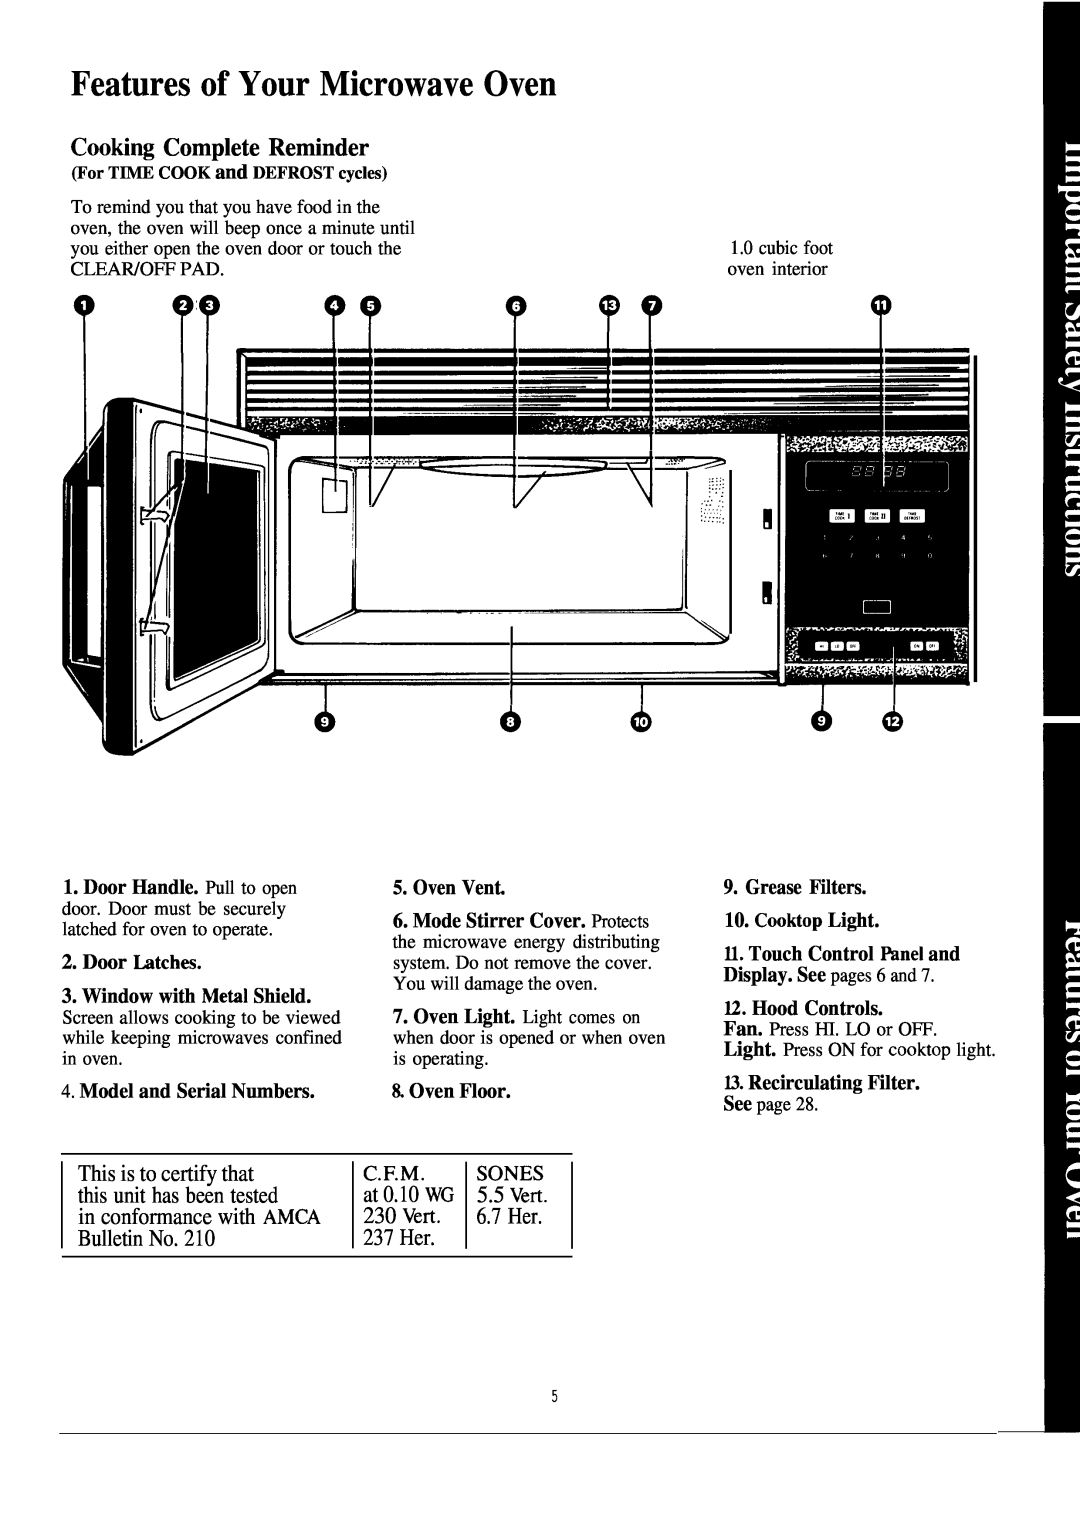 GE 164D2092P020, JVM131H Features of Your Microwave Oven, Cooting Complete Reminder, in conformance with AMCA Bulletin No 